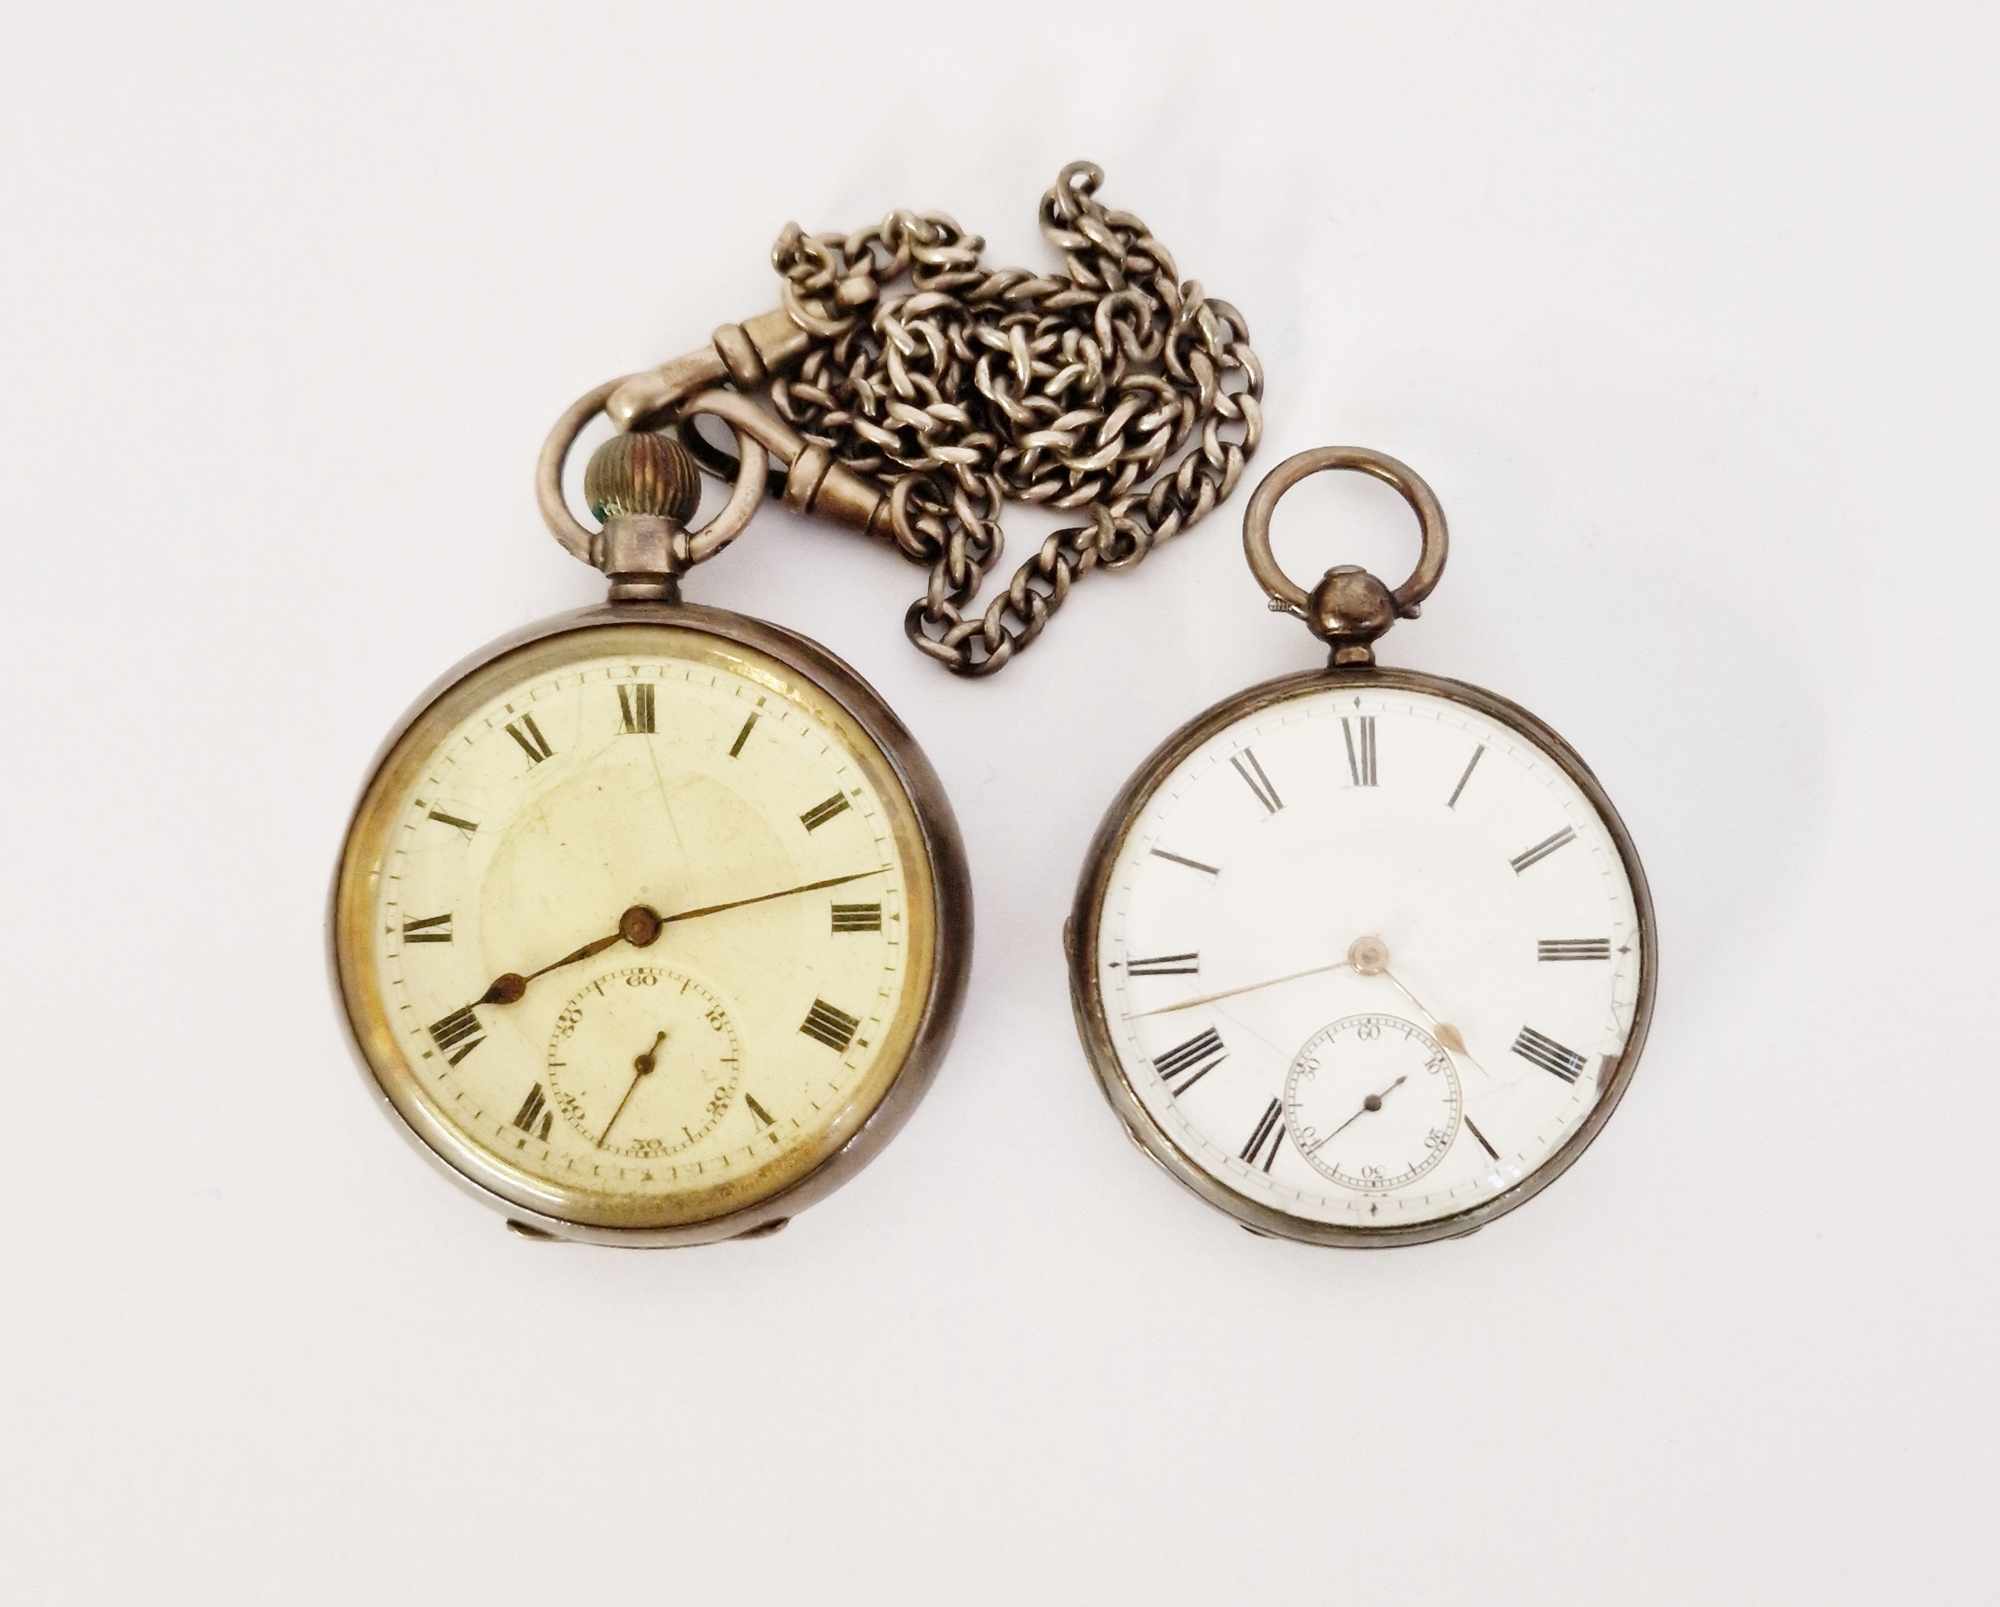 Victorian silver-cased open-faced pocket watch, the enamel dial having Roman numerals  with